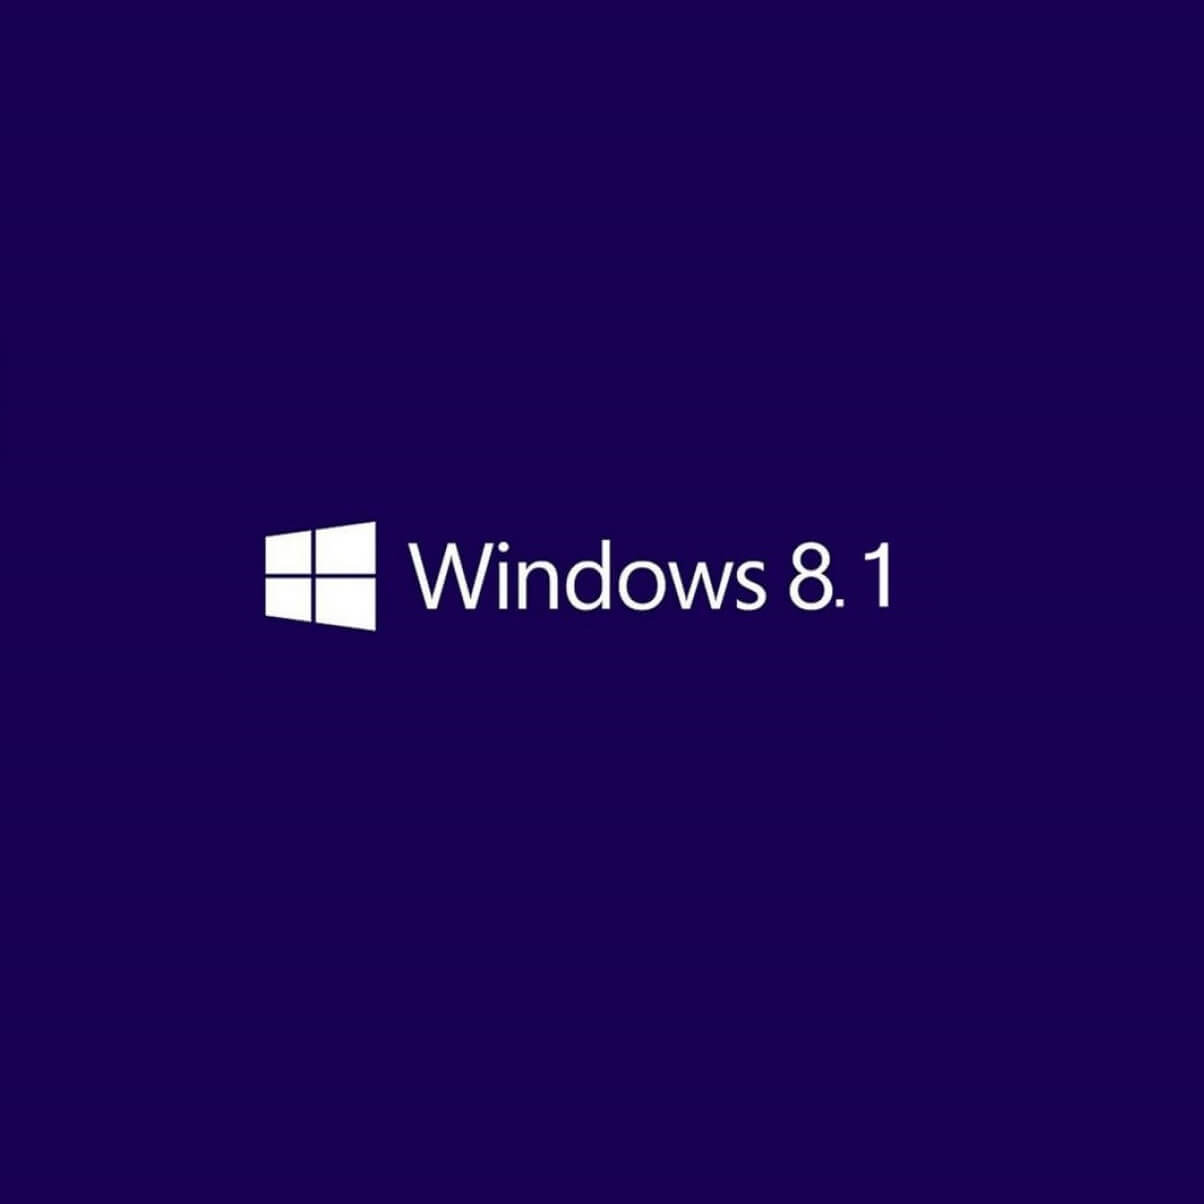 Windows 8.1 patch tuesday